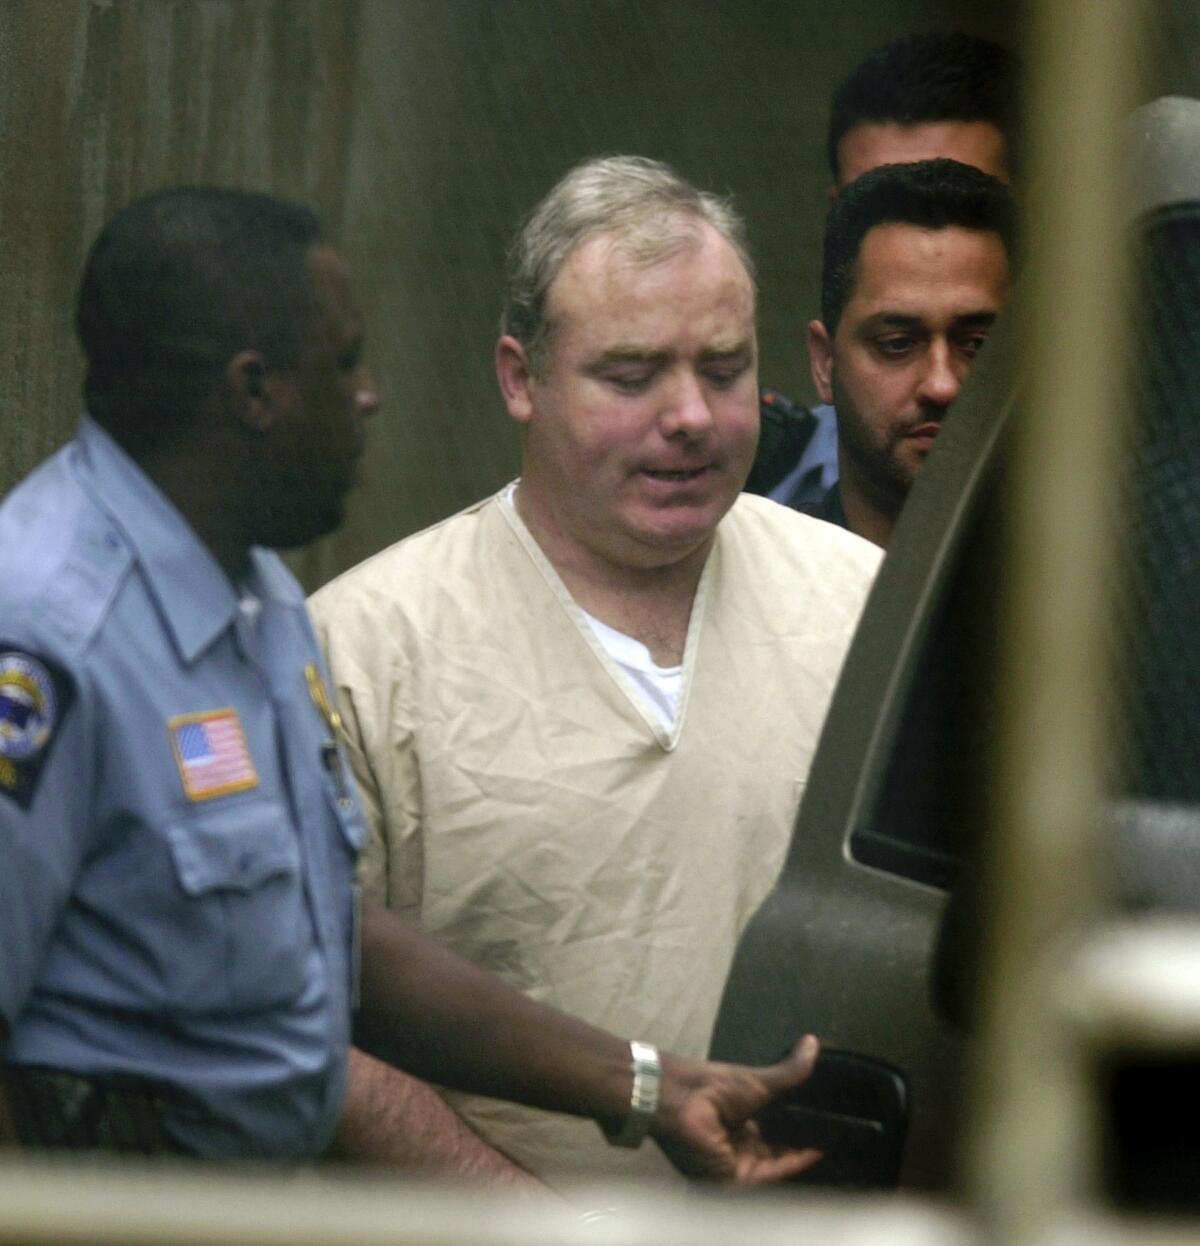 Michael Skakel, here in file photo, has been granted a new trial in connection with the beating death of Martha Moxley when they were 15-years-olds in Greenwich, Conn. Skakel, a cousin of the Kennedy family, was convicted of killing her.